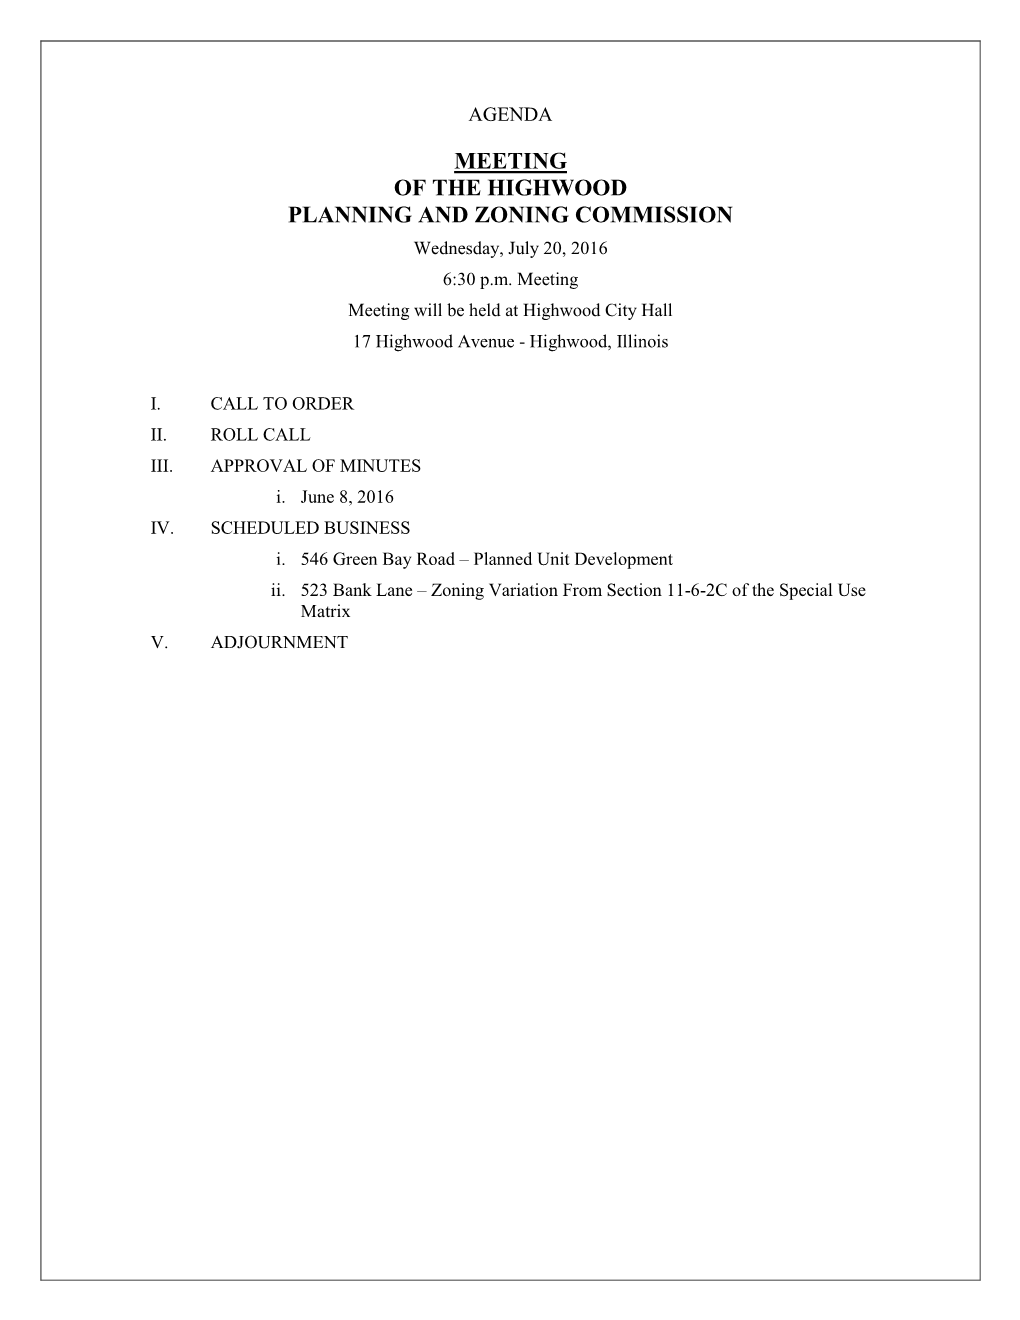 MEETING of the HIGHWOOD PLANNING and ZONING COMMISSION Wednesday, July 20, 2016 6:30 P.M